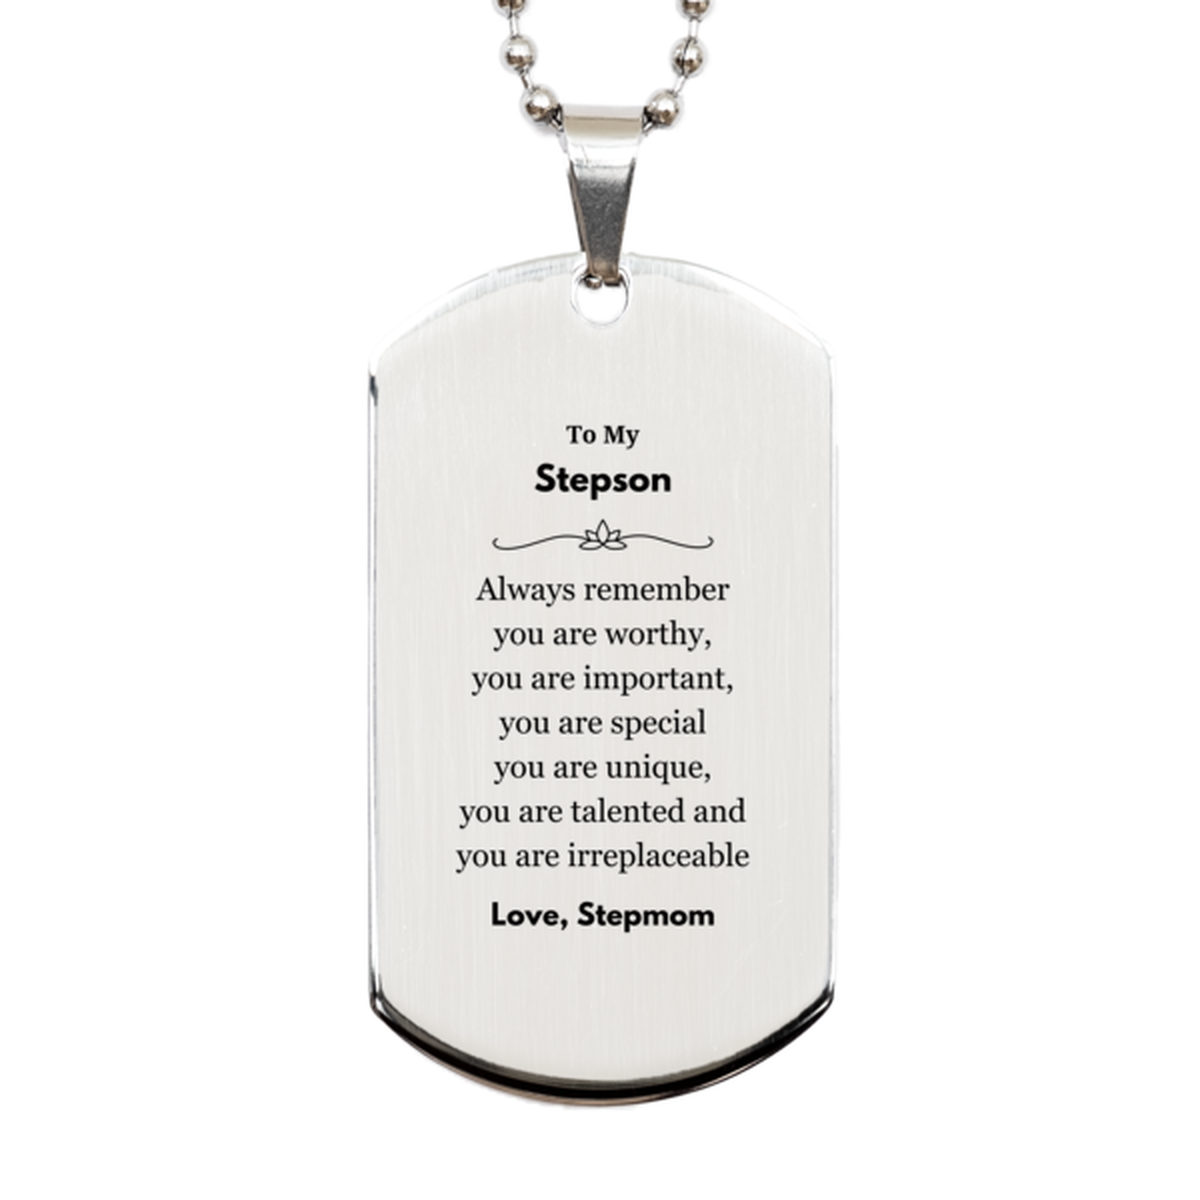 Stepson Birthday Gifts from Stepmom, Inspirational Silver Dog Tag for Stepson Christmas Graduation Gifts for Stepson Always remember you are worthy, you are important. Love, Stepmom